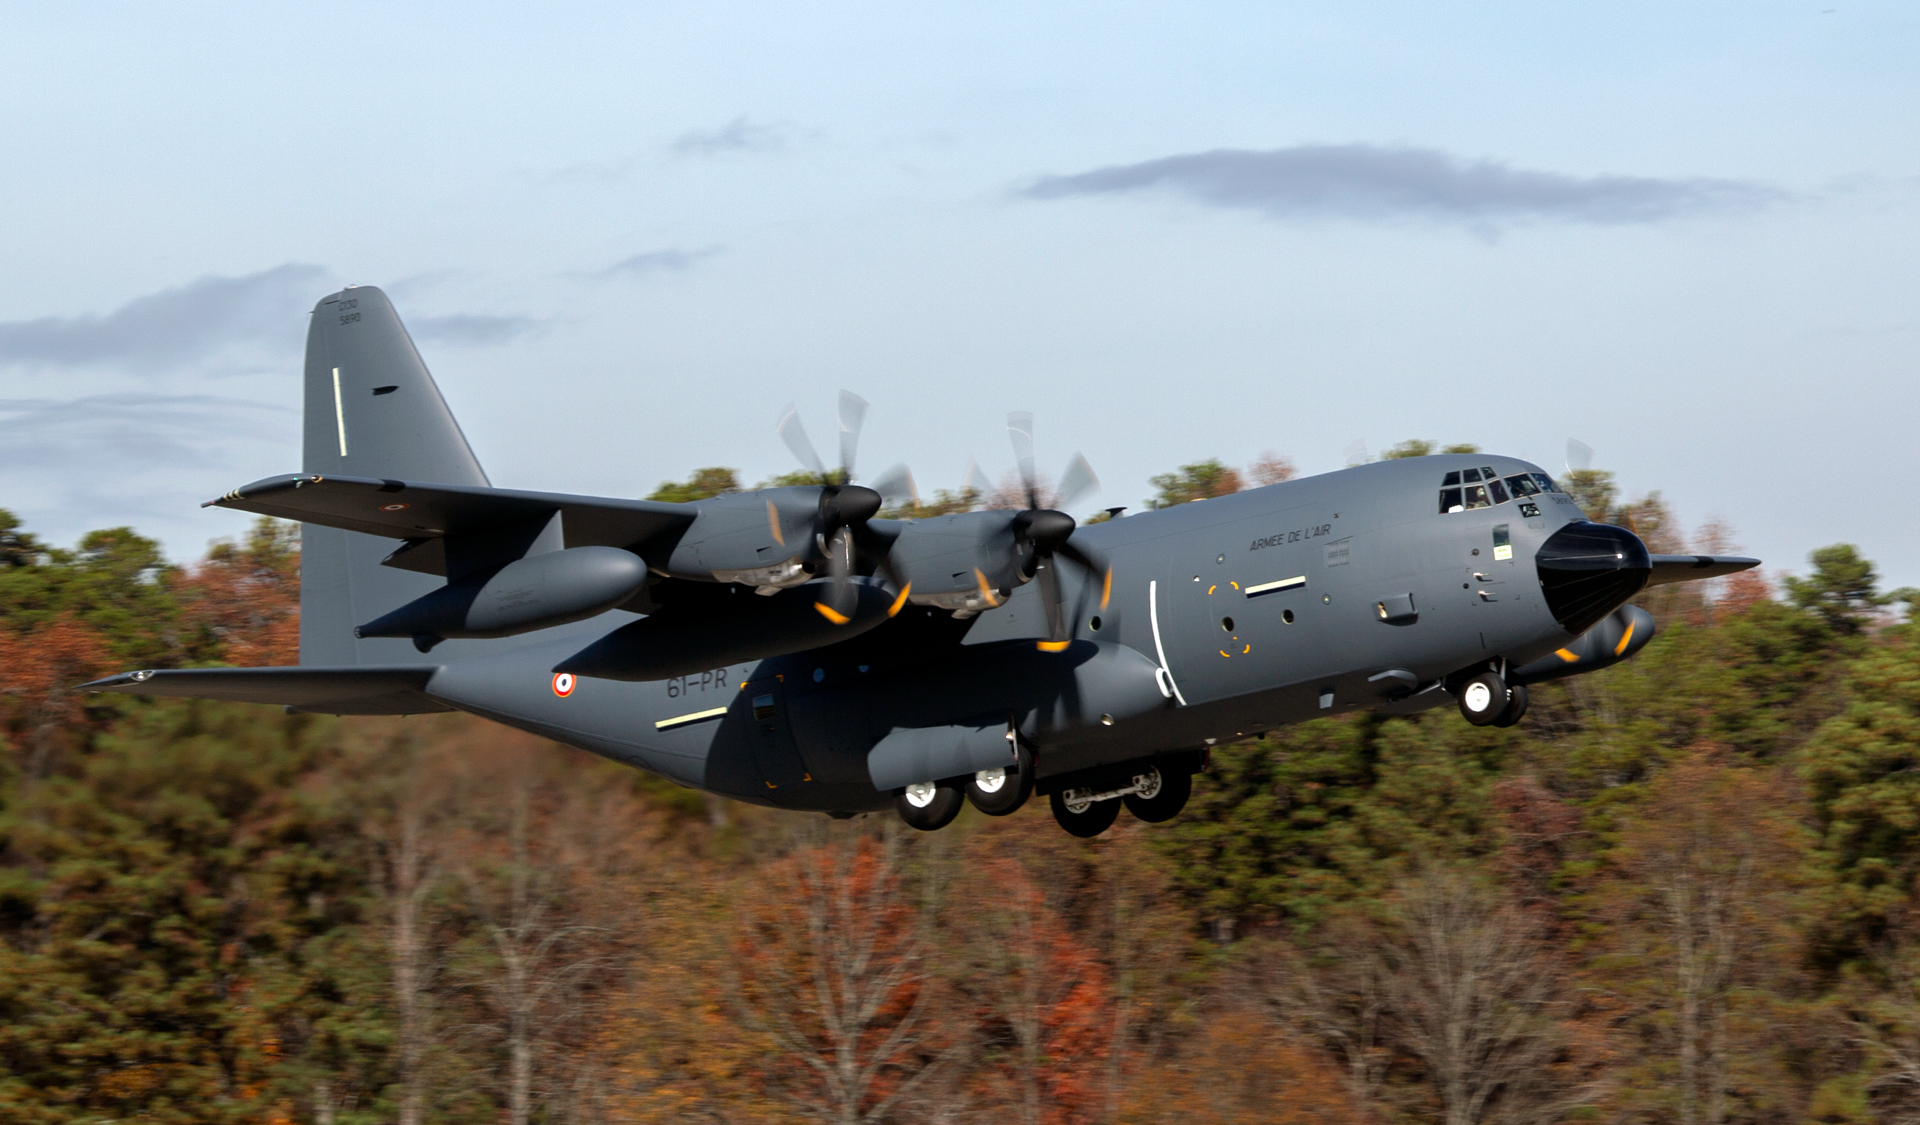 France's second KC-130J Super Hercules aerial refueler takes off from Lockheed Martin's facility in Marietta, Georgia, upon delivery in 2019.